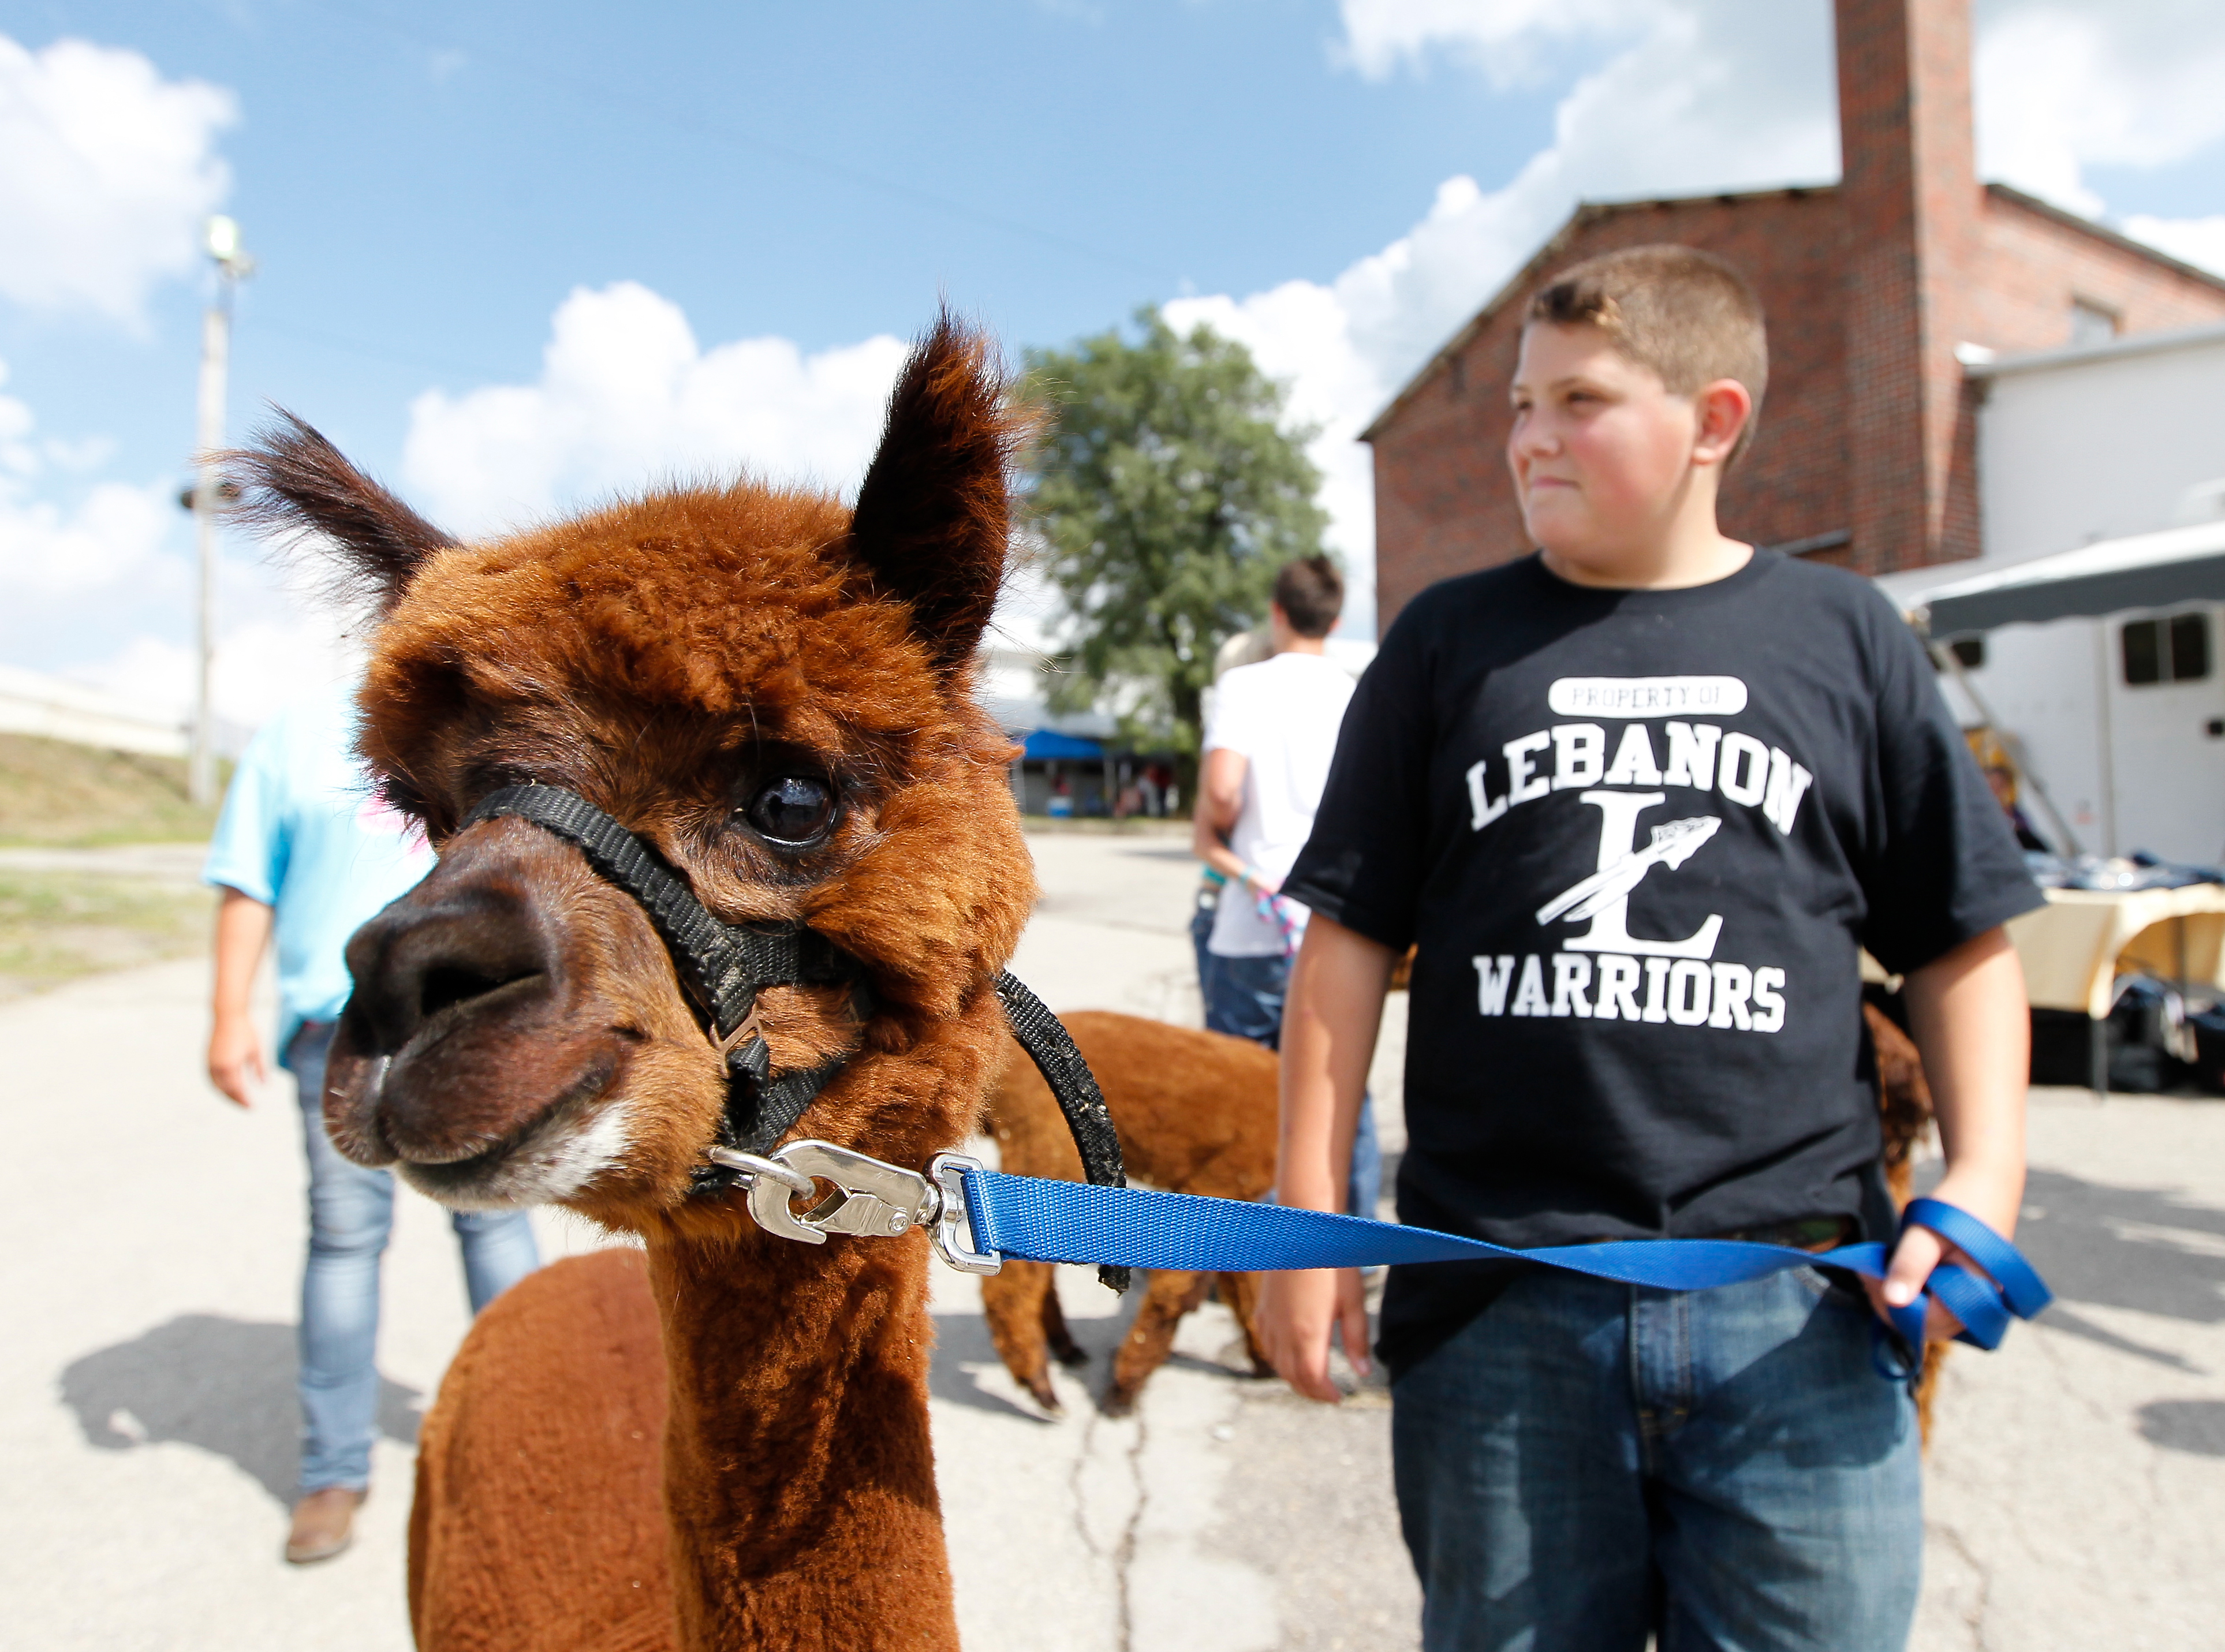 Bruce Booher walks with his Alpaca named Emma during the first day of the Warren County Fair Monday, July 14, 2014, in Lebanon, Ohio.  NICK DAGGY / STAFF